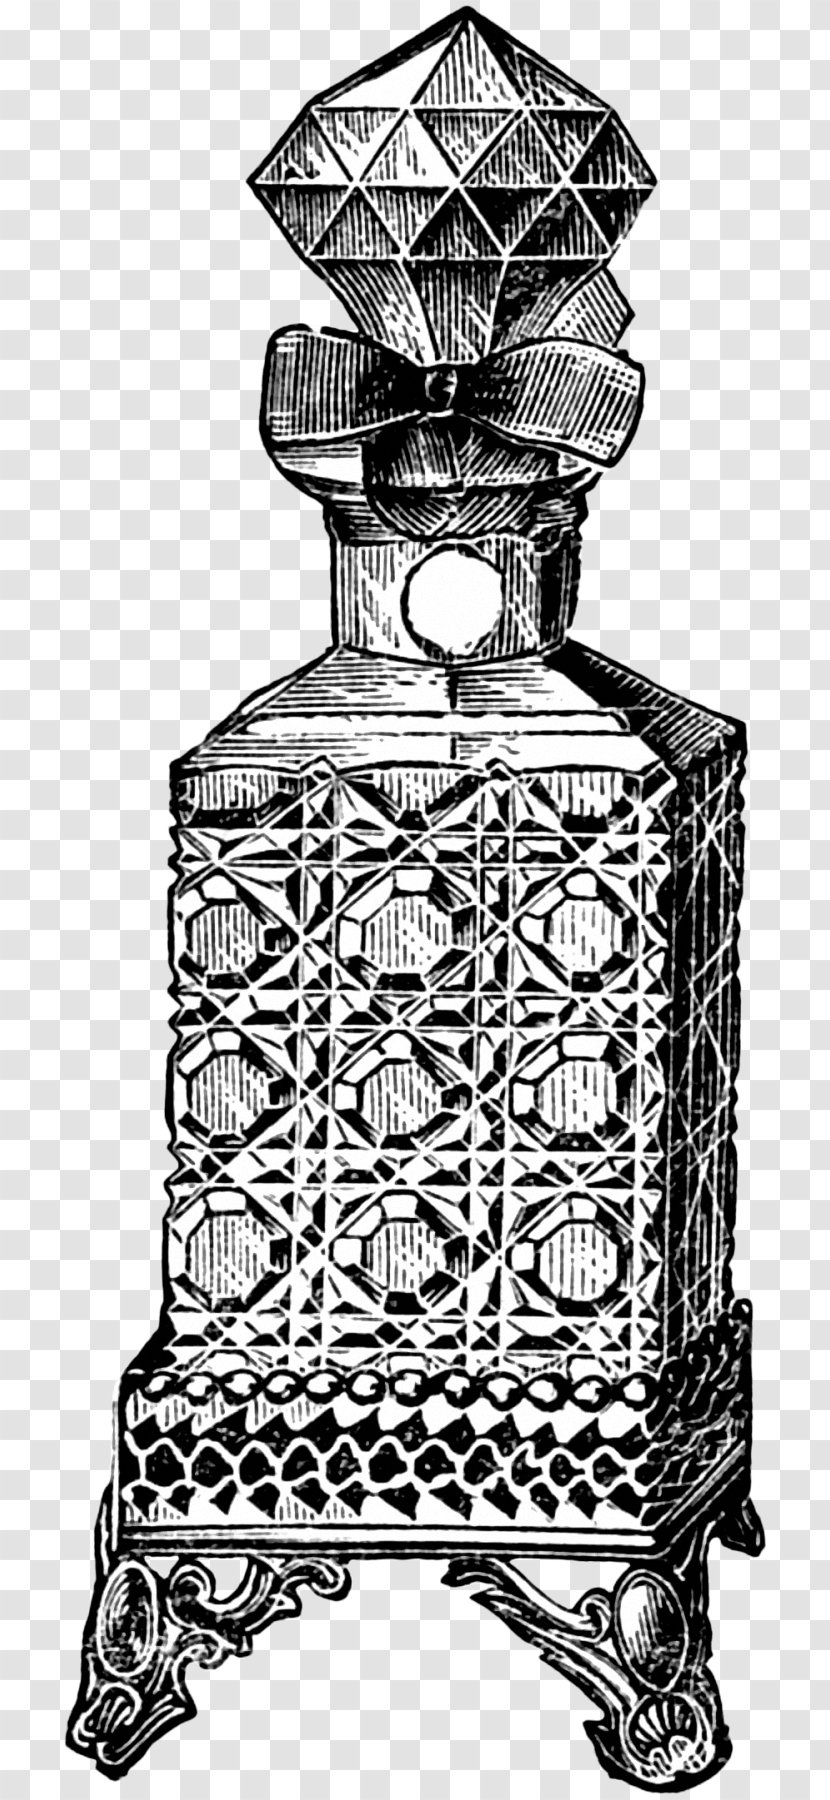 Black And White Monochrome Photography Visual Arts - PARFUME Transparent PNG